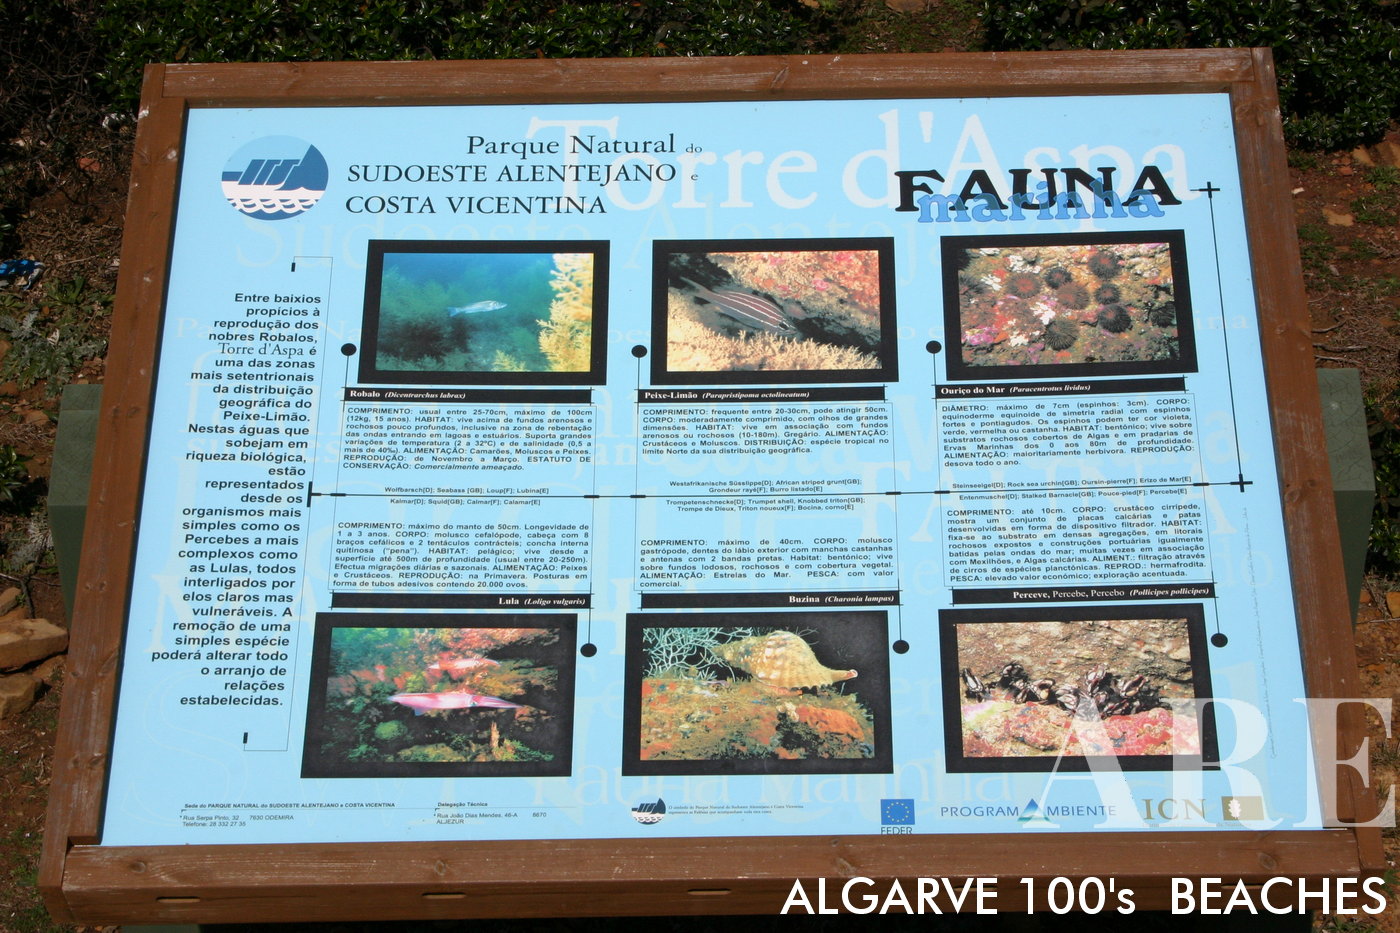 A display of Costa Vicentina & Sudoeste Alentejano's local fauna presented on a council information board, showcasing the region's rich biodiversity and commitment to conservation.